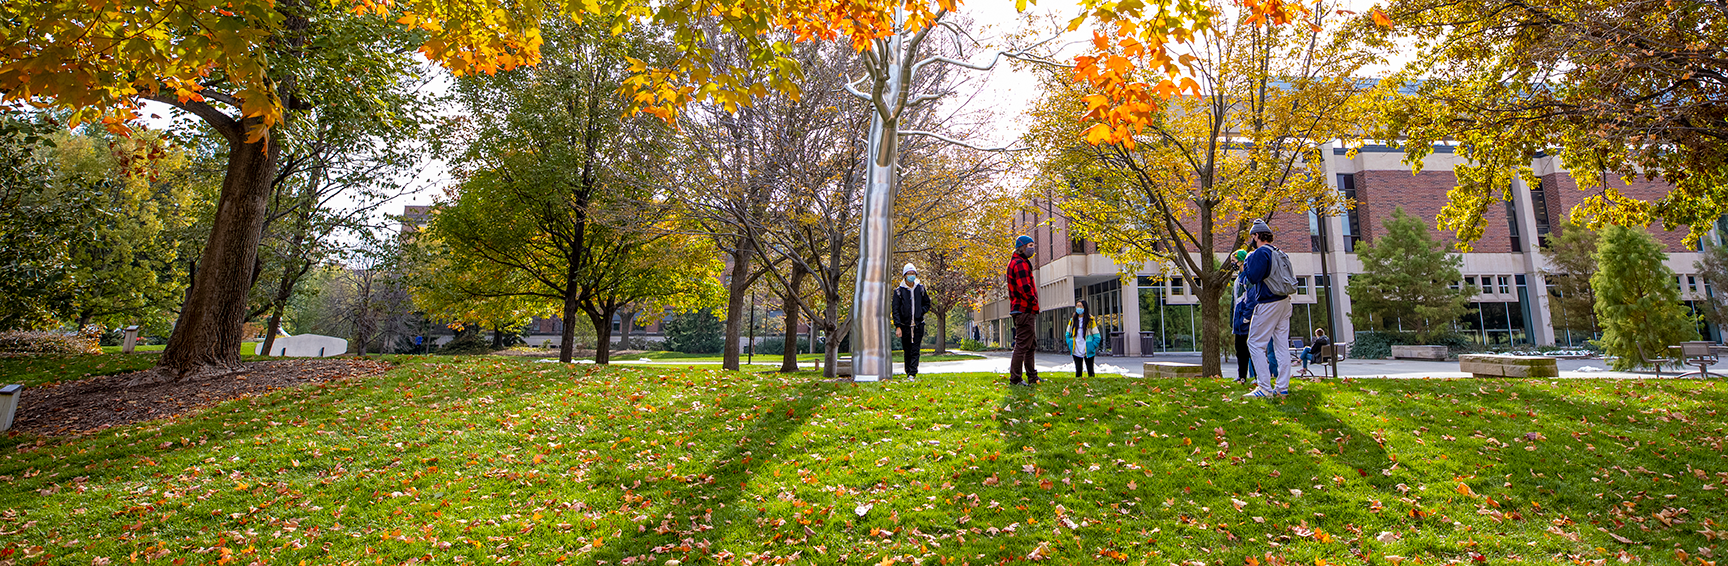 Students in class outside by the sculpture, Breach by Roxy Paine. City Campus. October 28, 2020. Photo by Craig Chandler / University Communication.